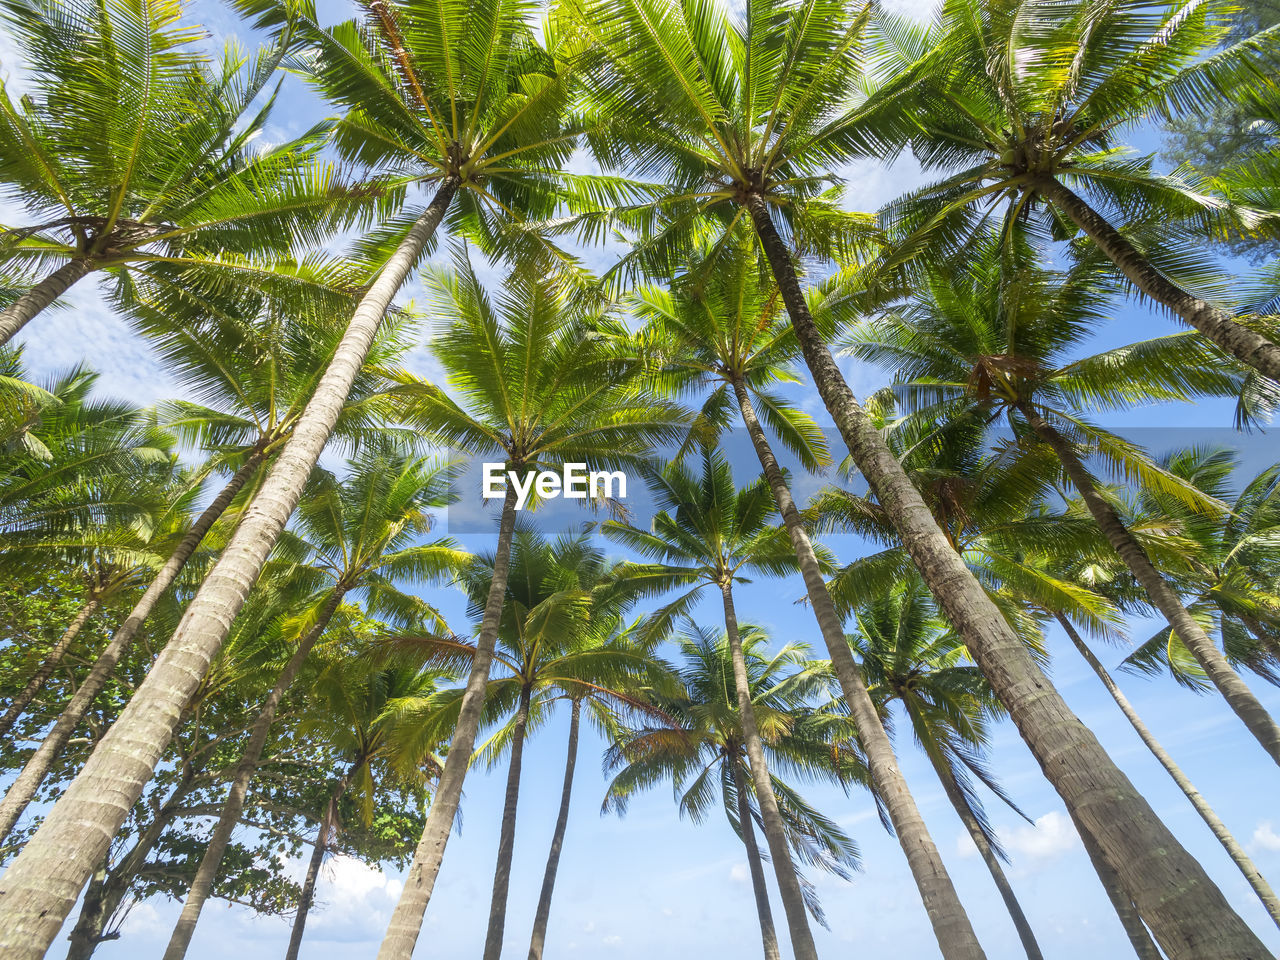 tree, tropical climate, palm tree, plant, sky, nature, low angle view, beauty in nature, borassus flabellifer, growth, tropical tree, tranquility, coconut palm tree, no people, leaf, tree trunk, land, trunk, green, day, outdoors, palm leaf, tropics, environment, scenics - nature, idyllic, vegetation, travel destinations, travel, backgrounds, sunlight, branch, directly below, jungle, tranquil scene